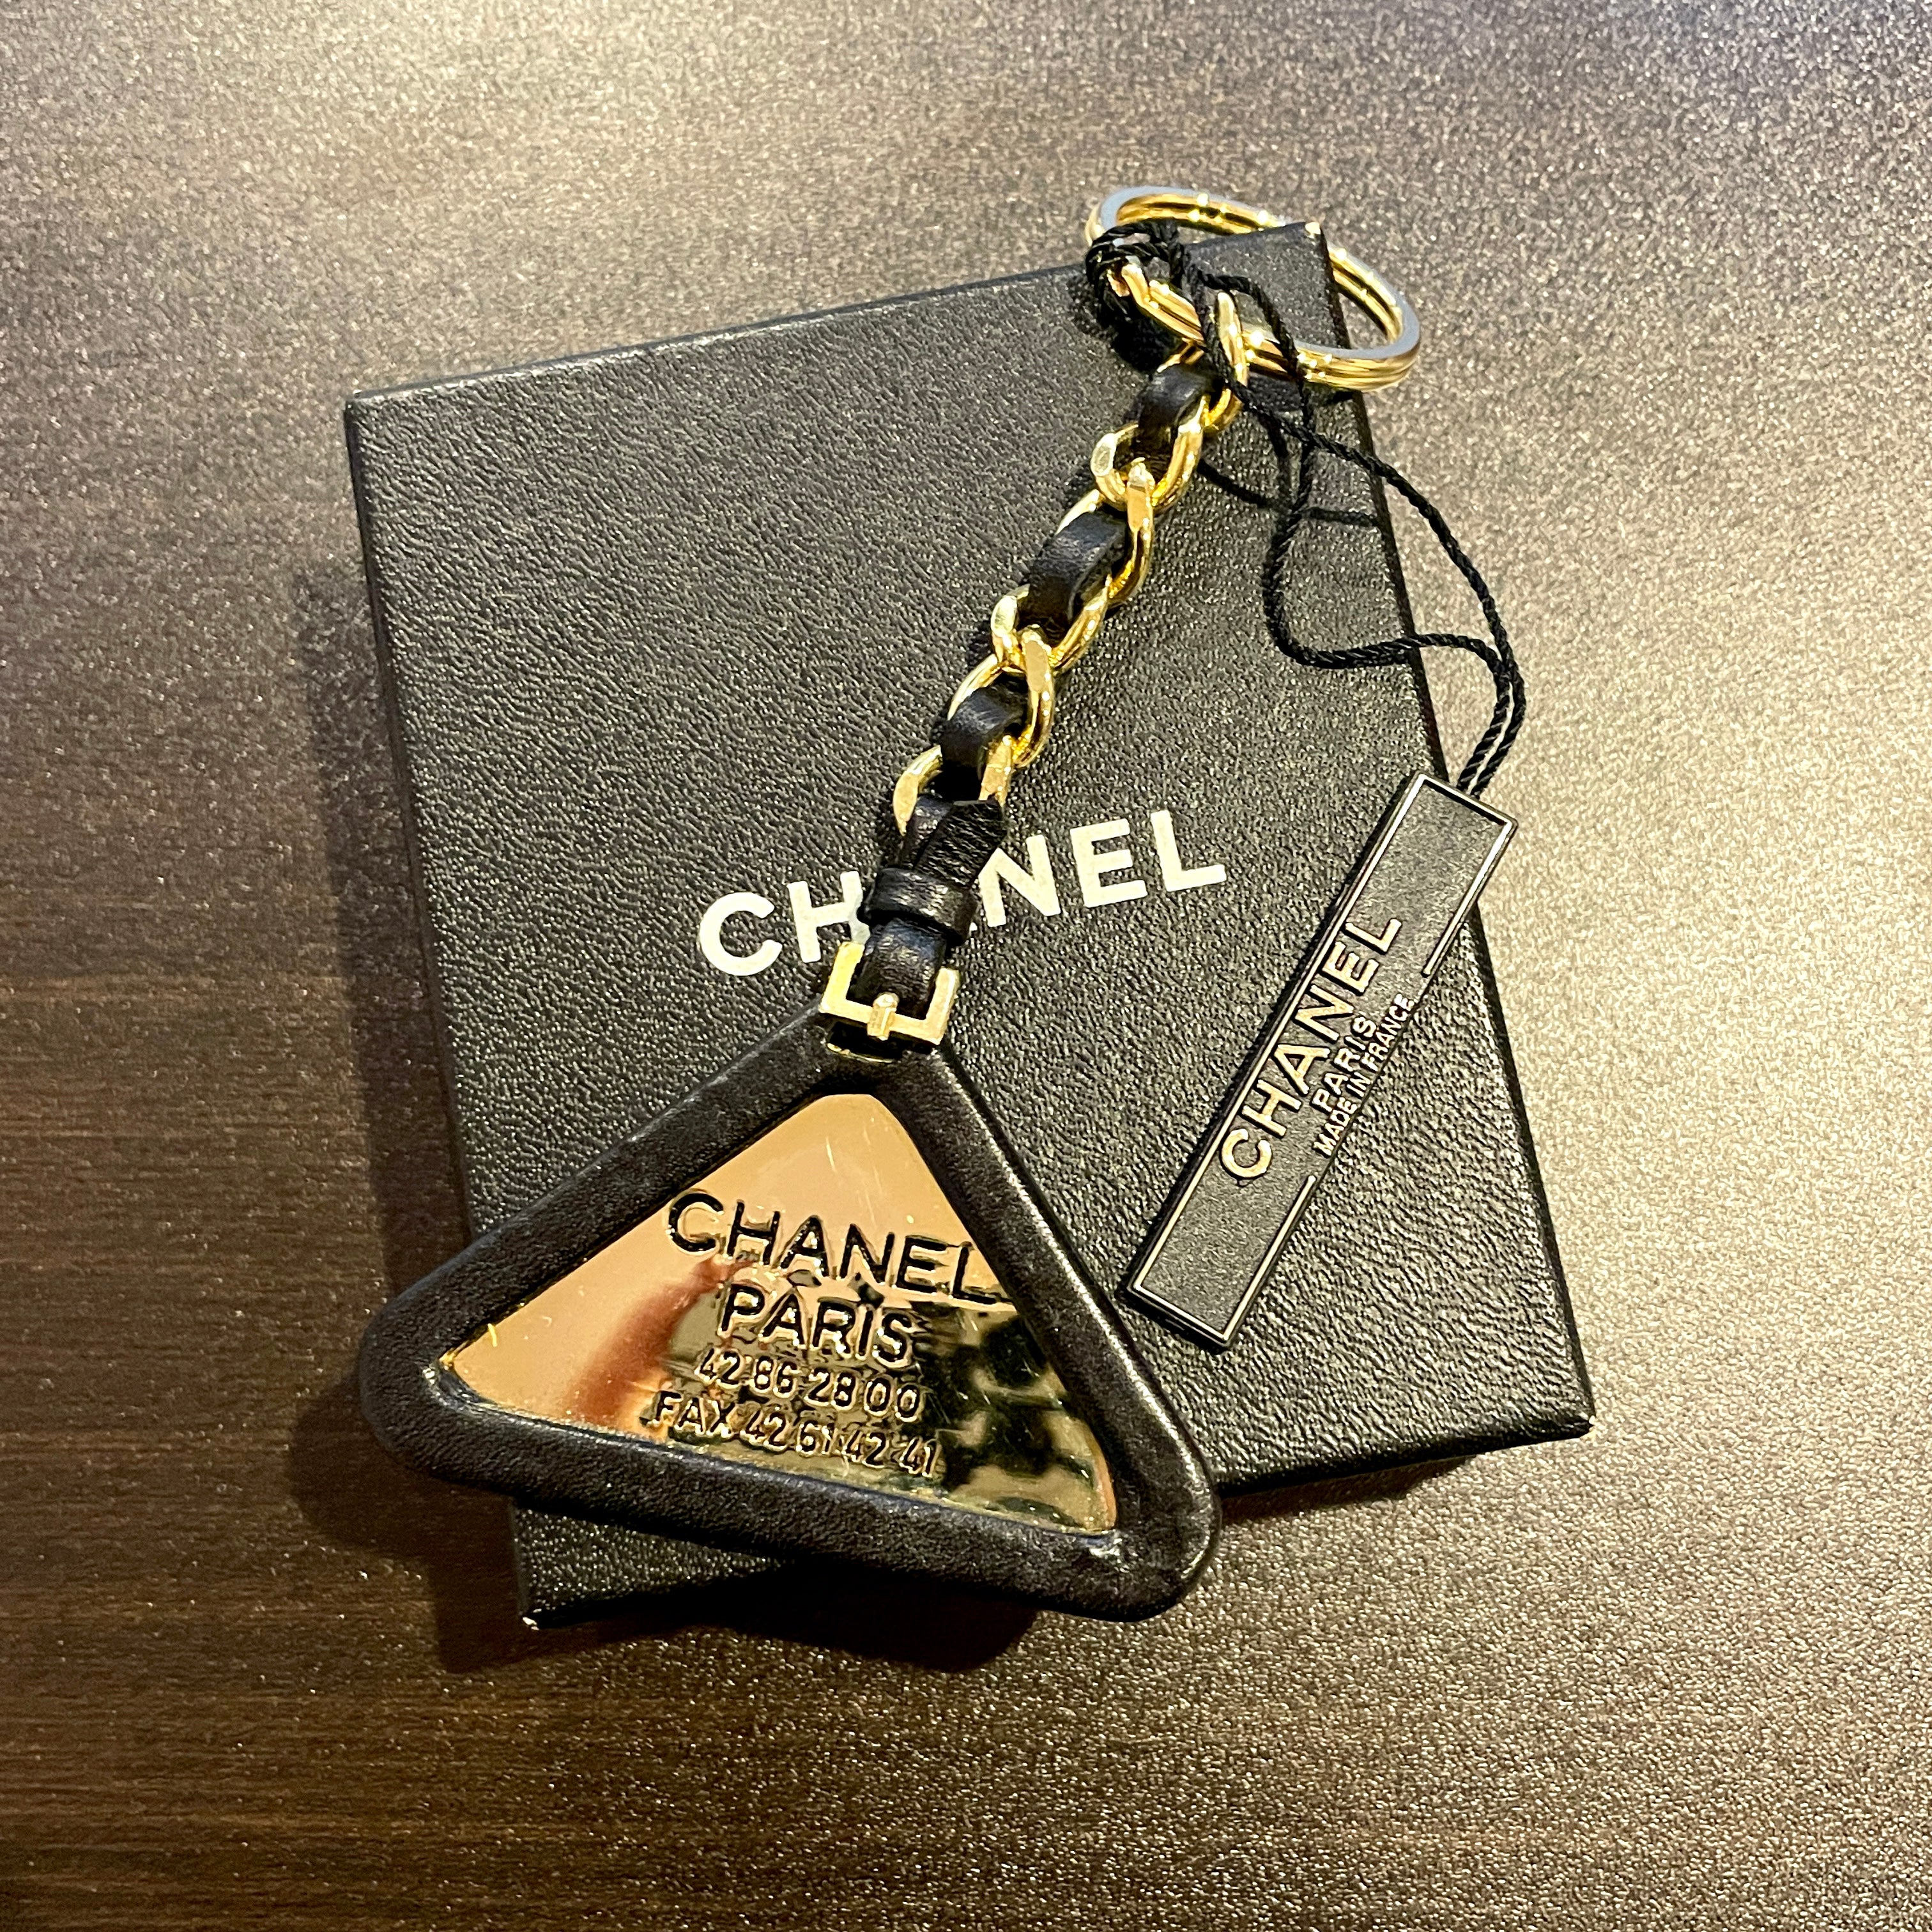 RARE☆☆☆☆☆AUTH Pre-owned CHANEL Chanel Leather Triangle Key Ring 94P